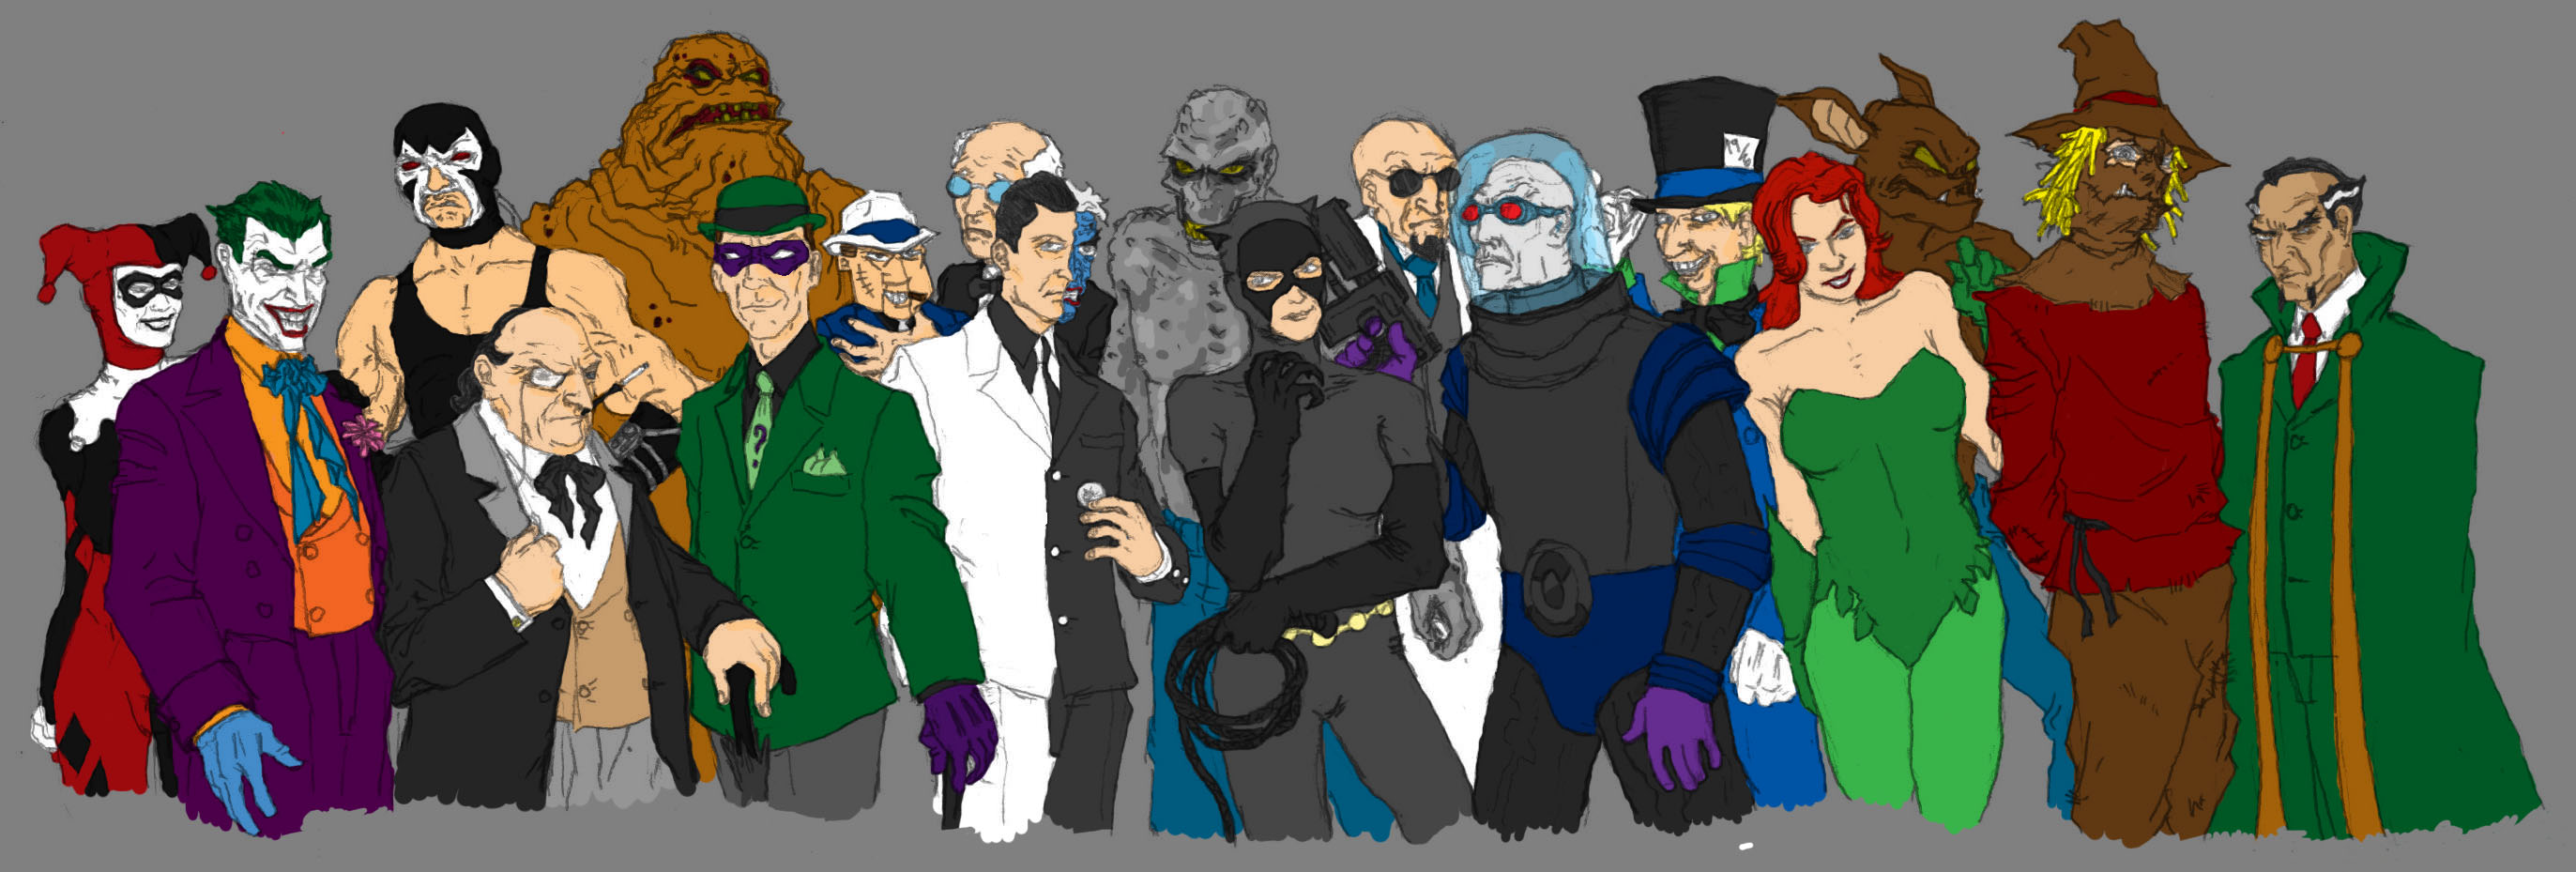 The Rogues by SEELE-02 on DeviantArt